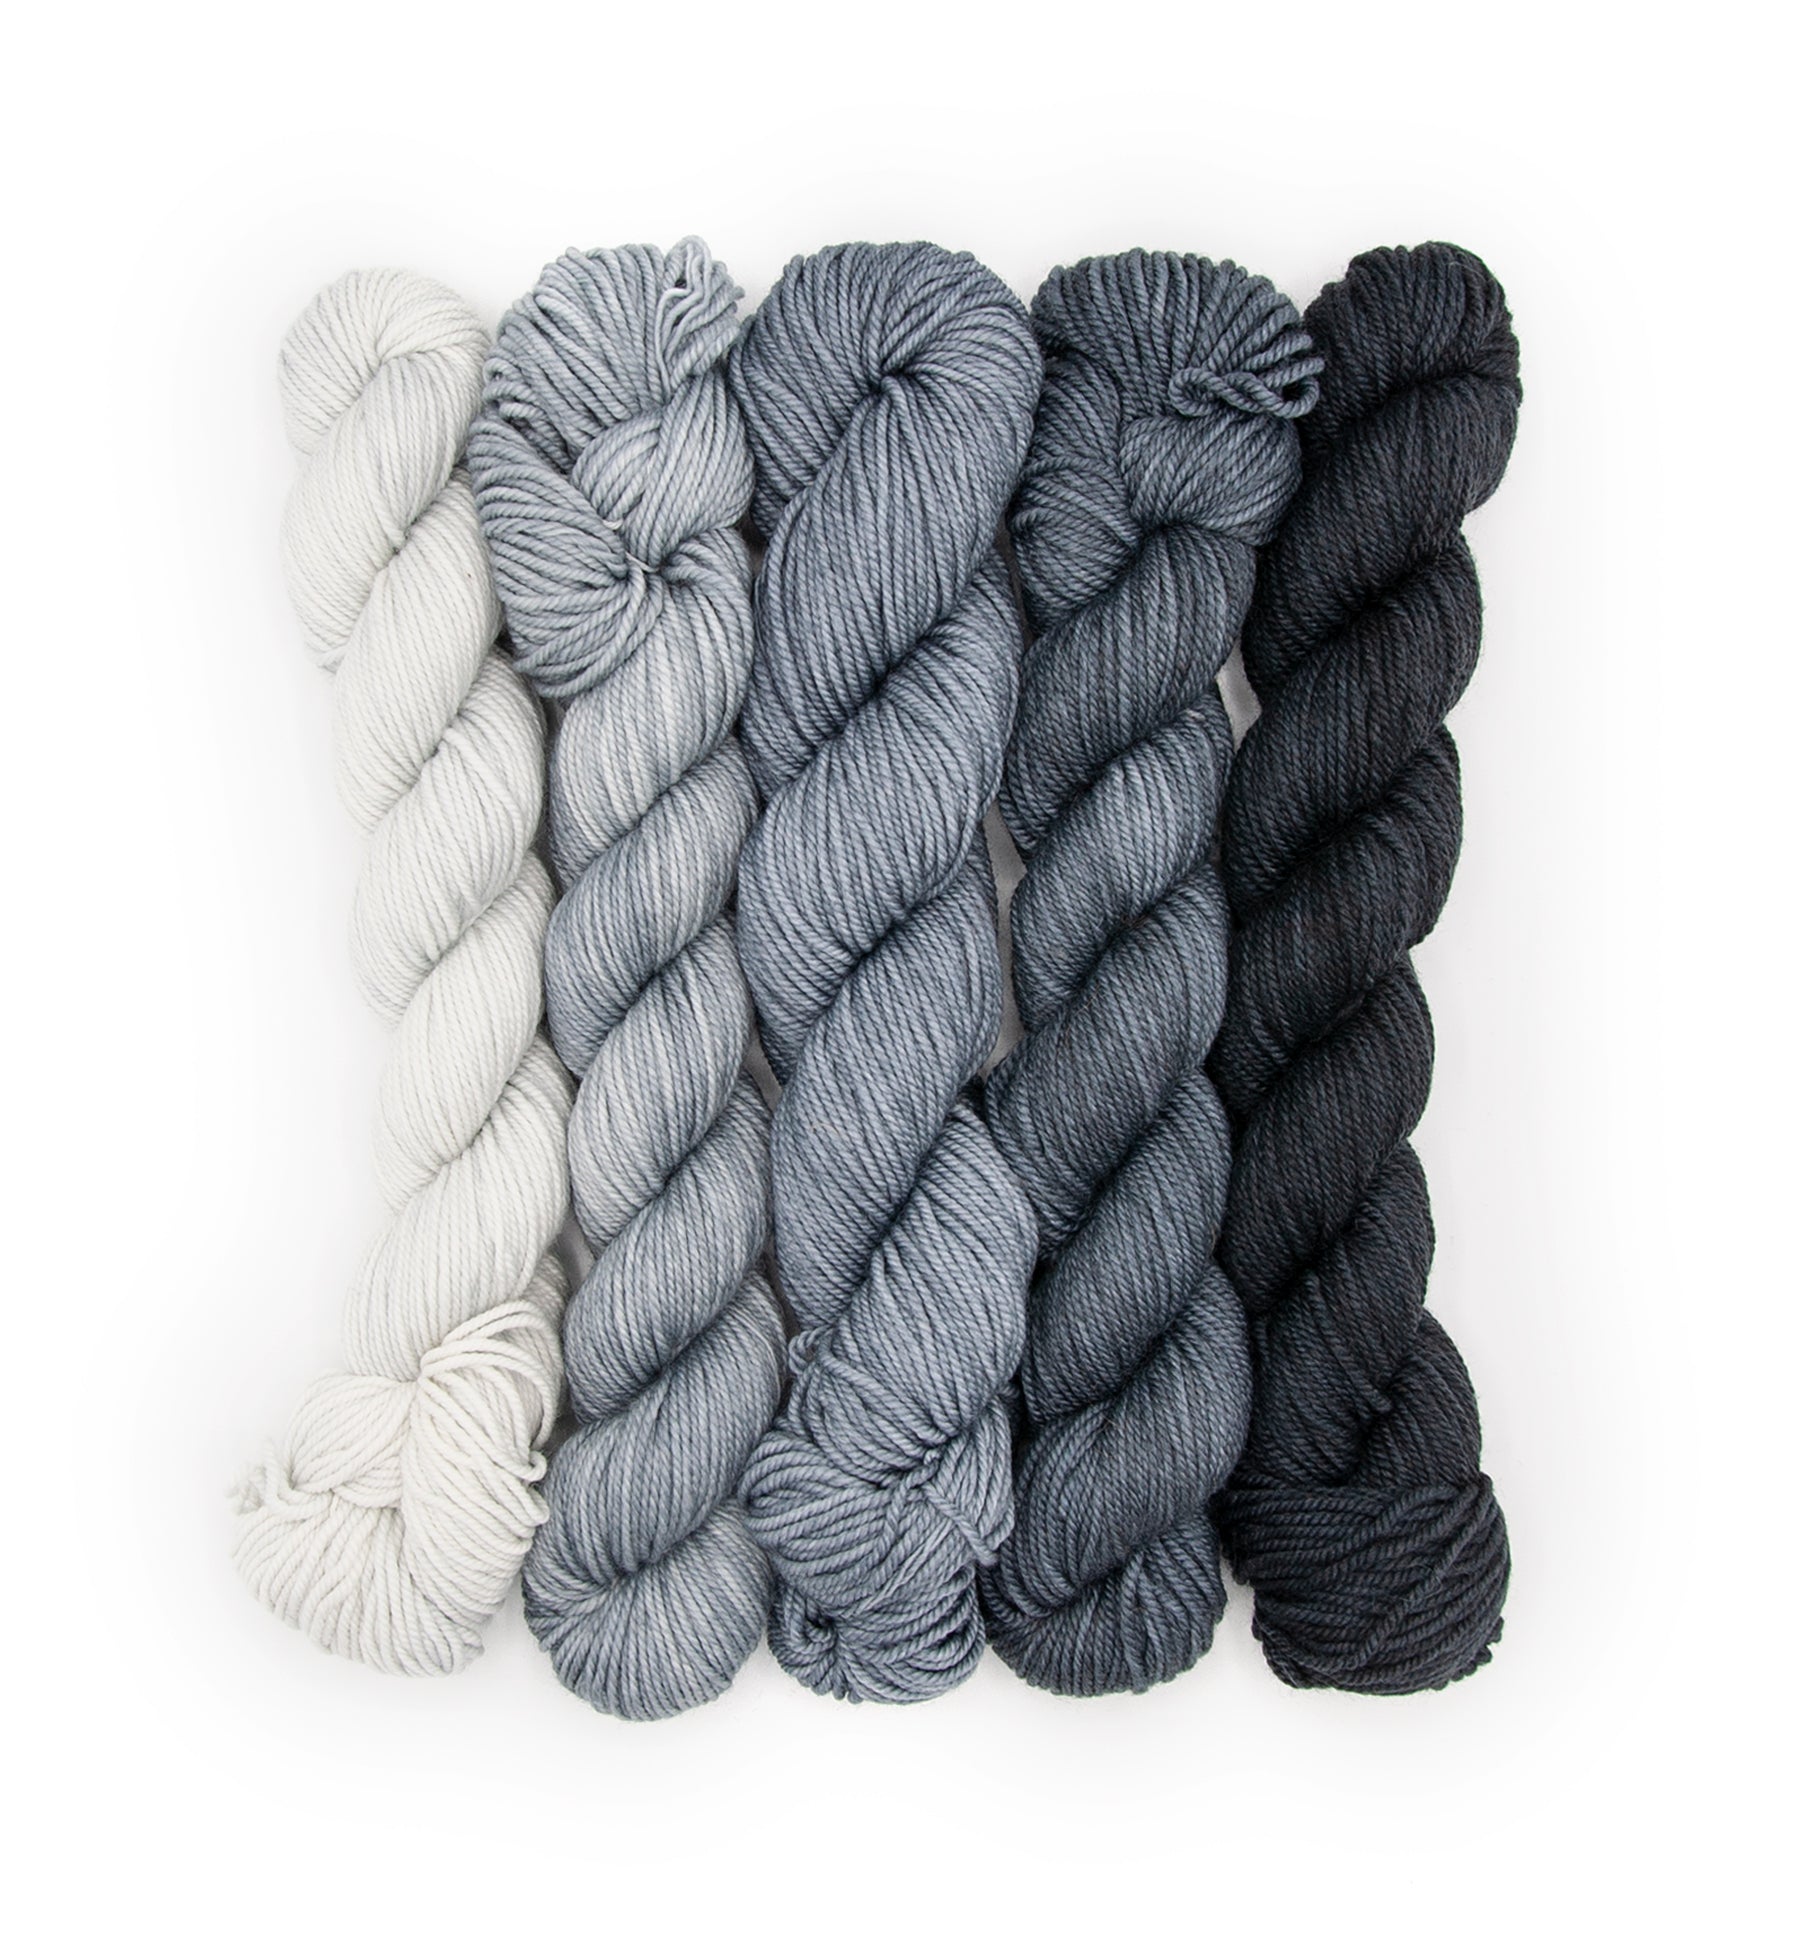 Ombre Fingering cotton yarn